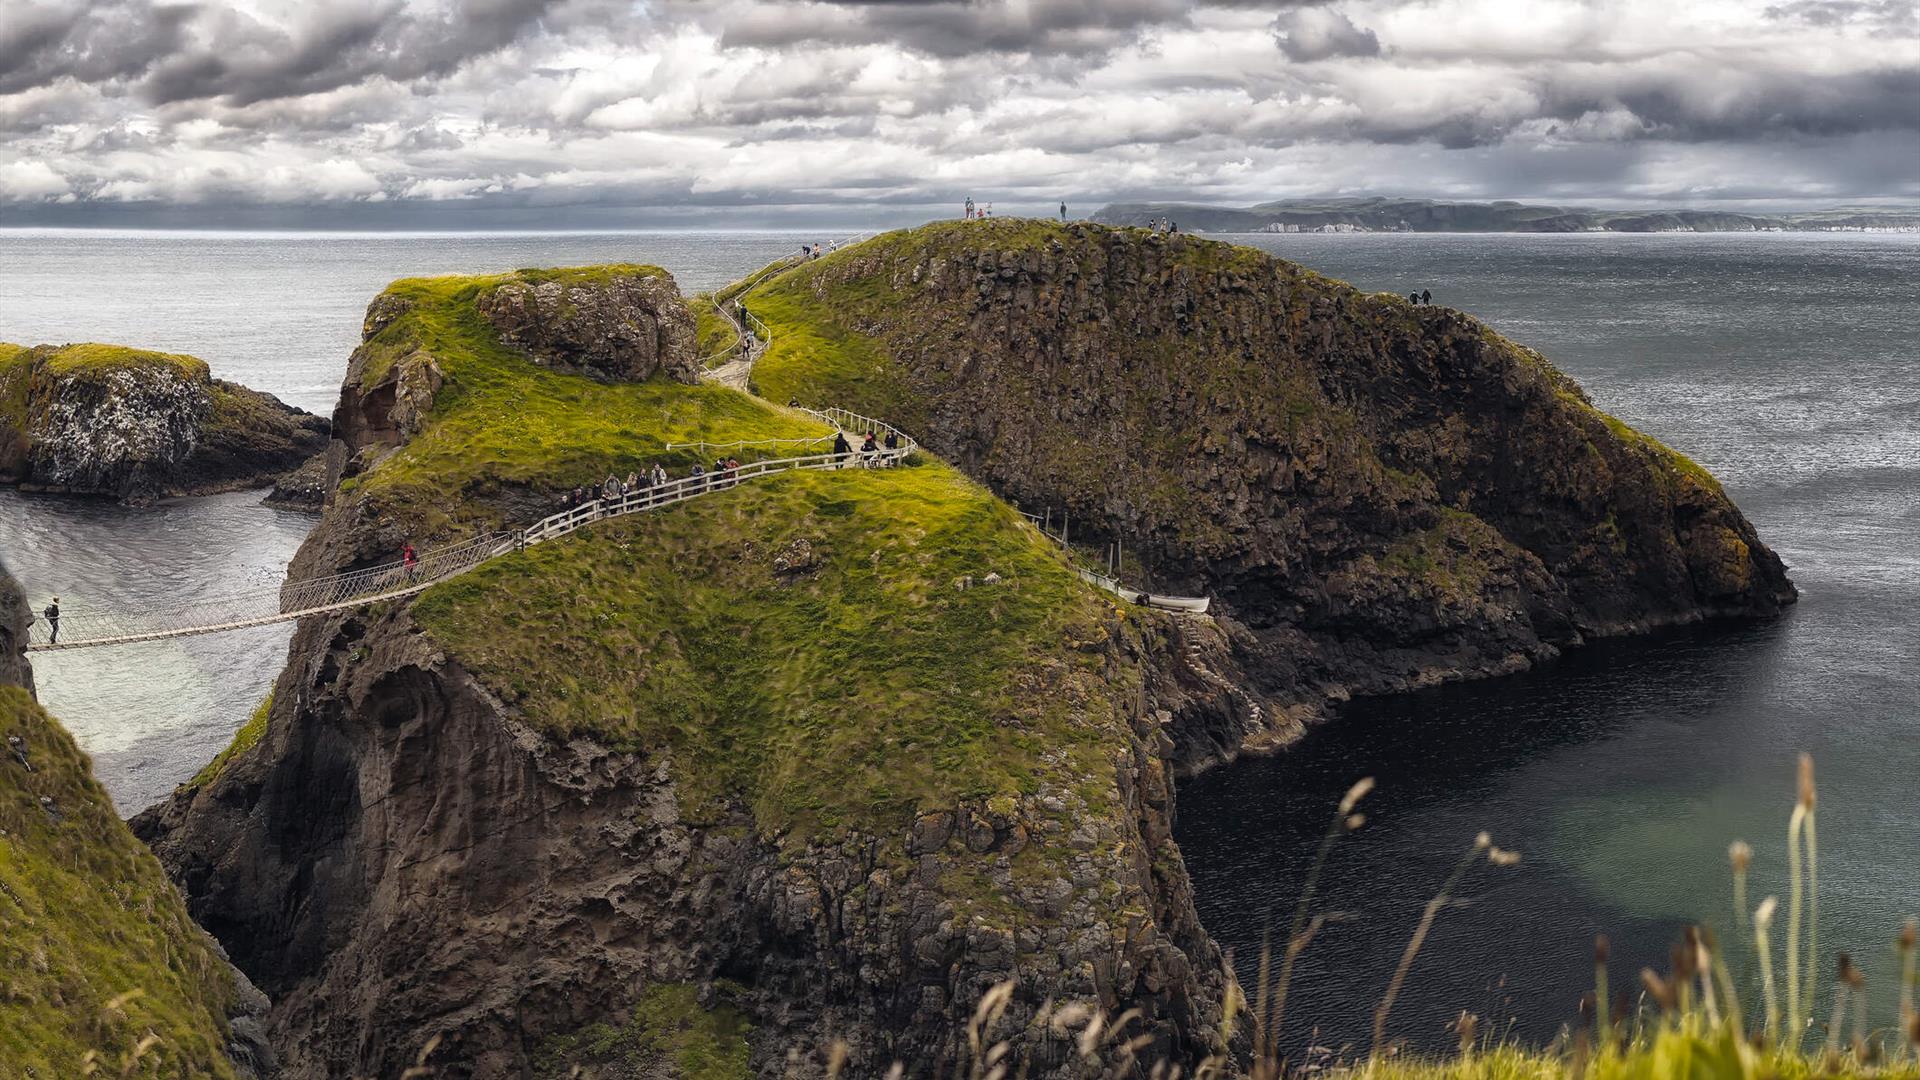 https://eu-assets.simpleview-europe.com/northernireland/imageresizer/?image=%2Fdmsimgs%2FCarrick-a-Rede_Rope_Bridge_web-size_2500x1200px_1917095013.jpg&action=ProductDetailImage